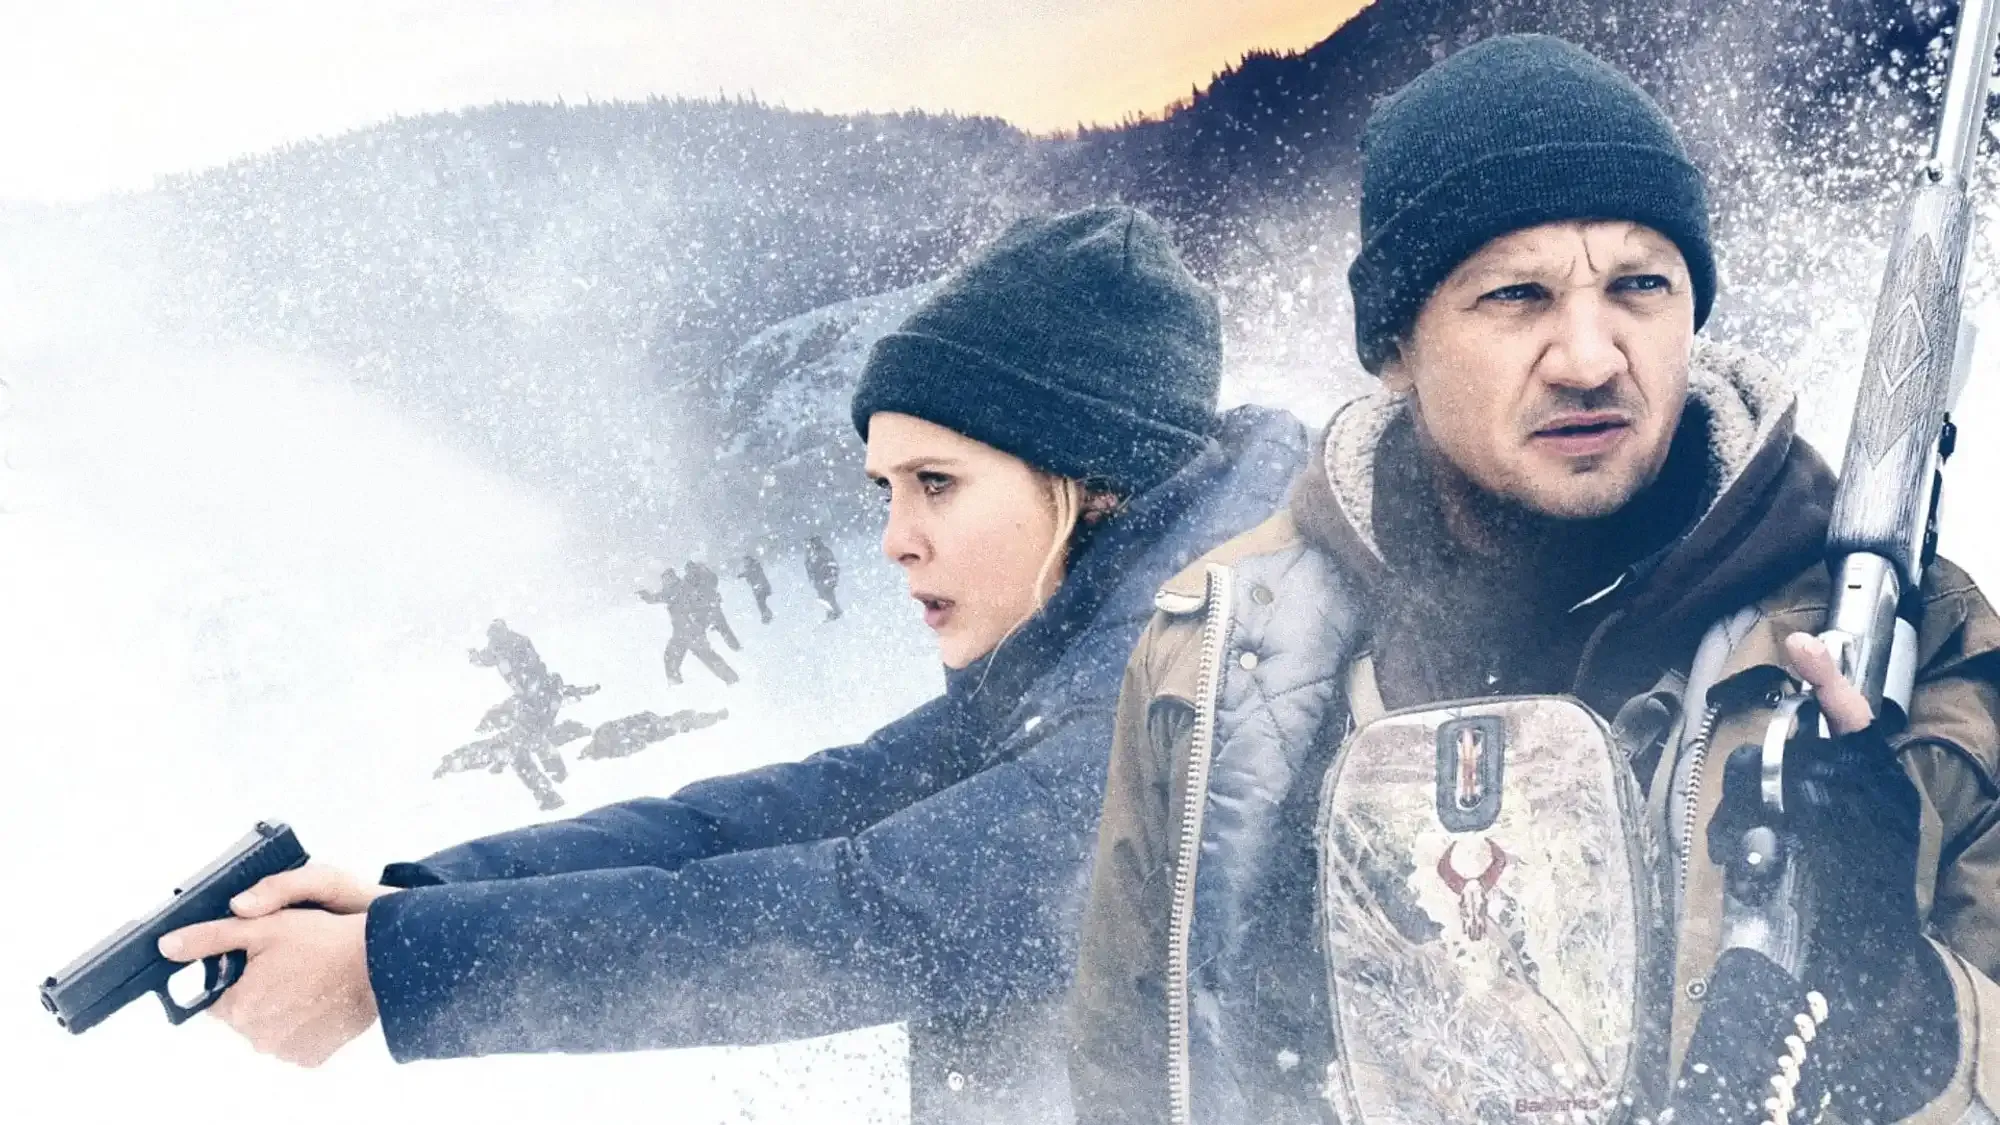 Wind River movie review